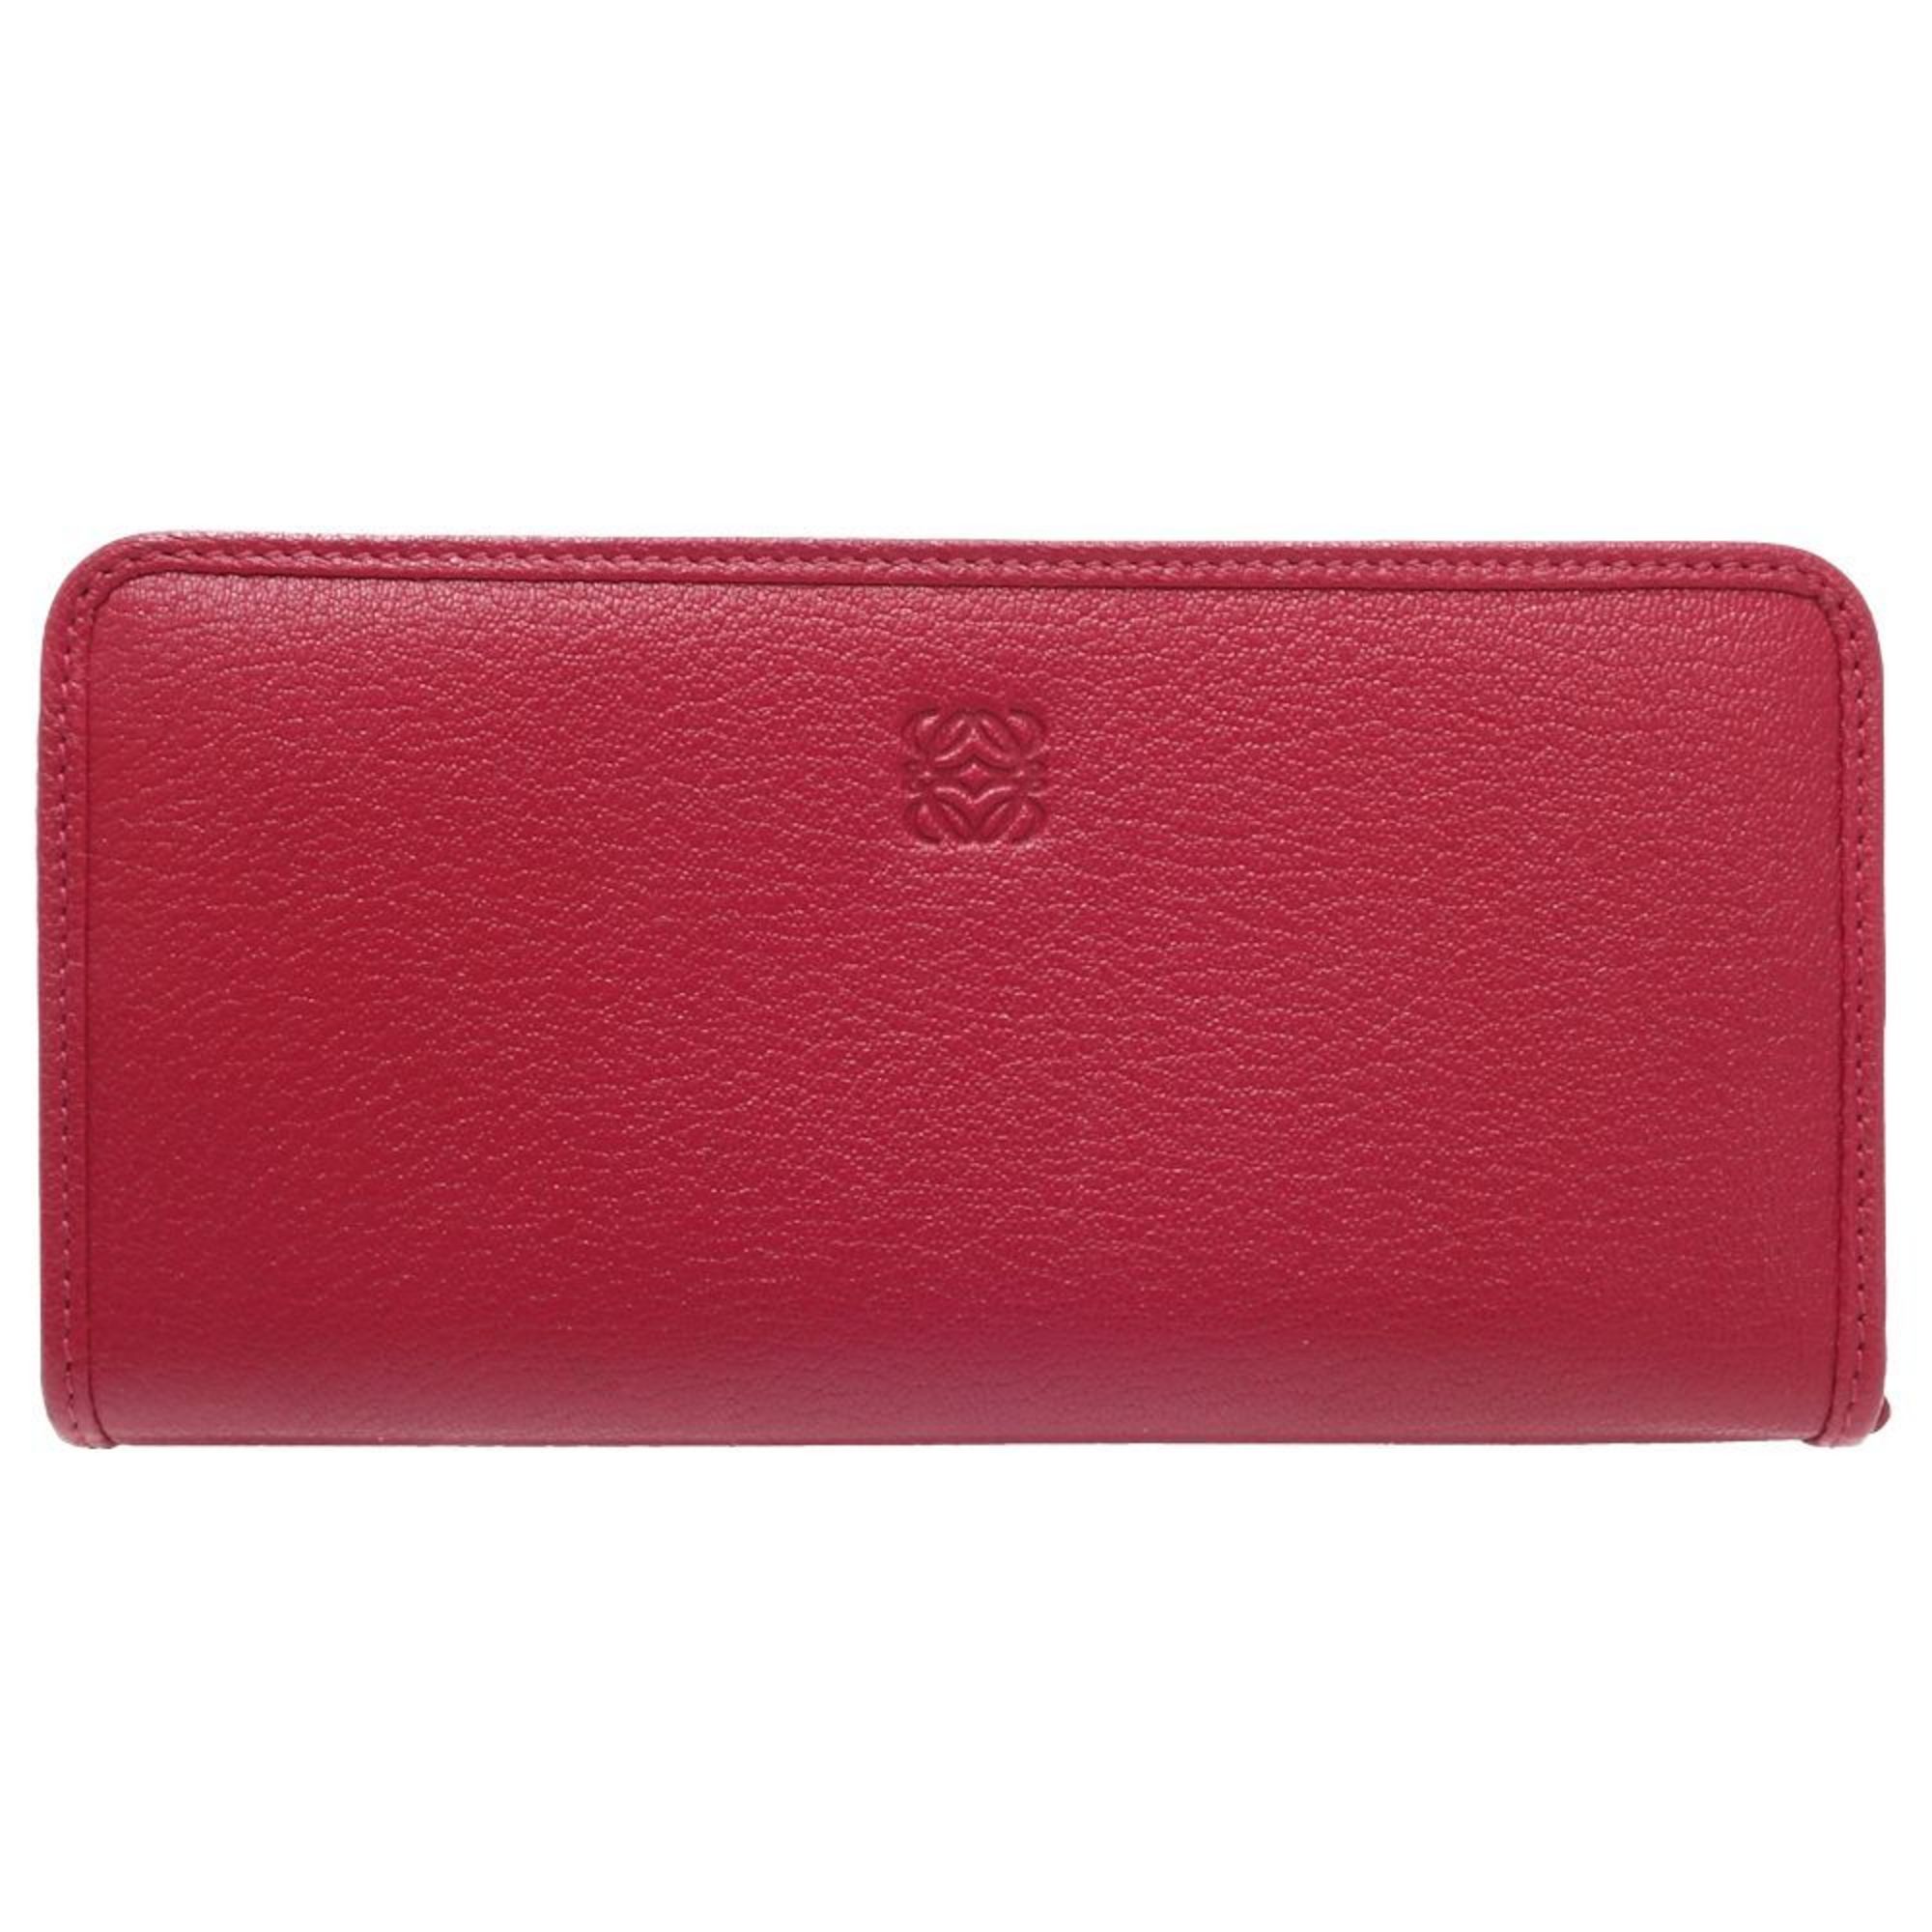 LOEWE Long Wallet 113.95.E07 Round Leather Red 180440